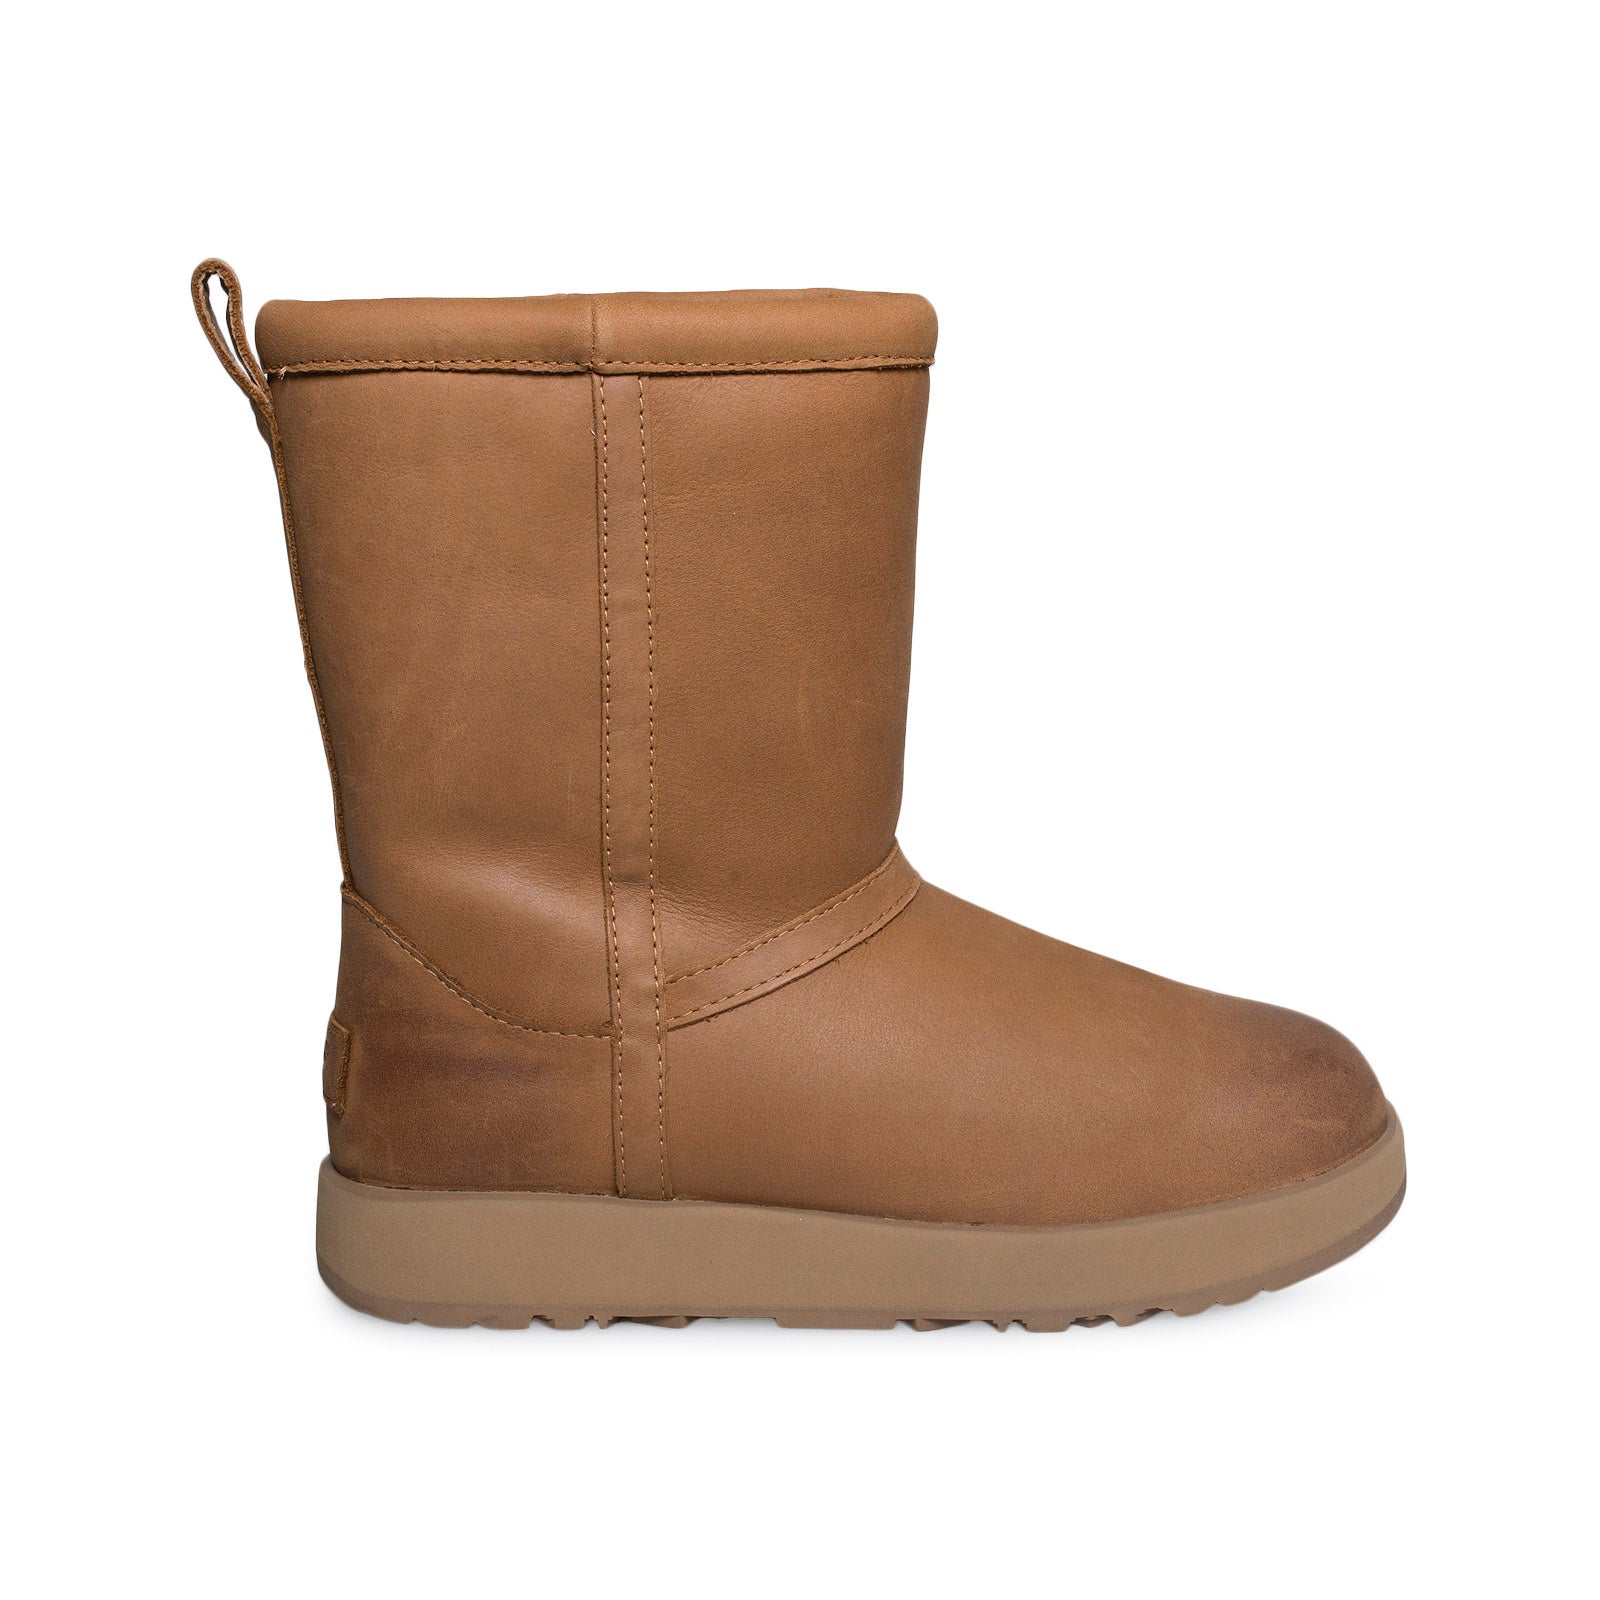 classic short leather waterproof boot ugg